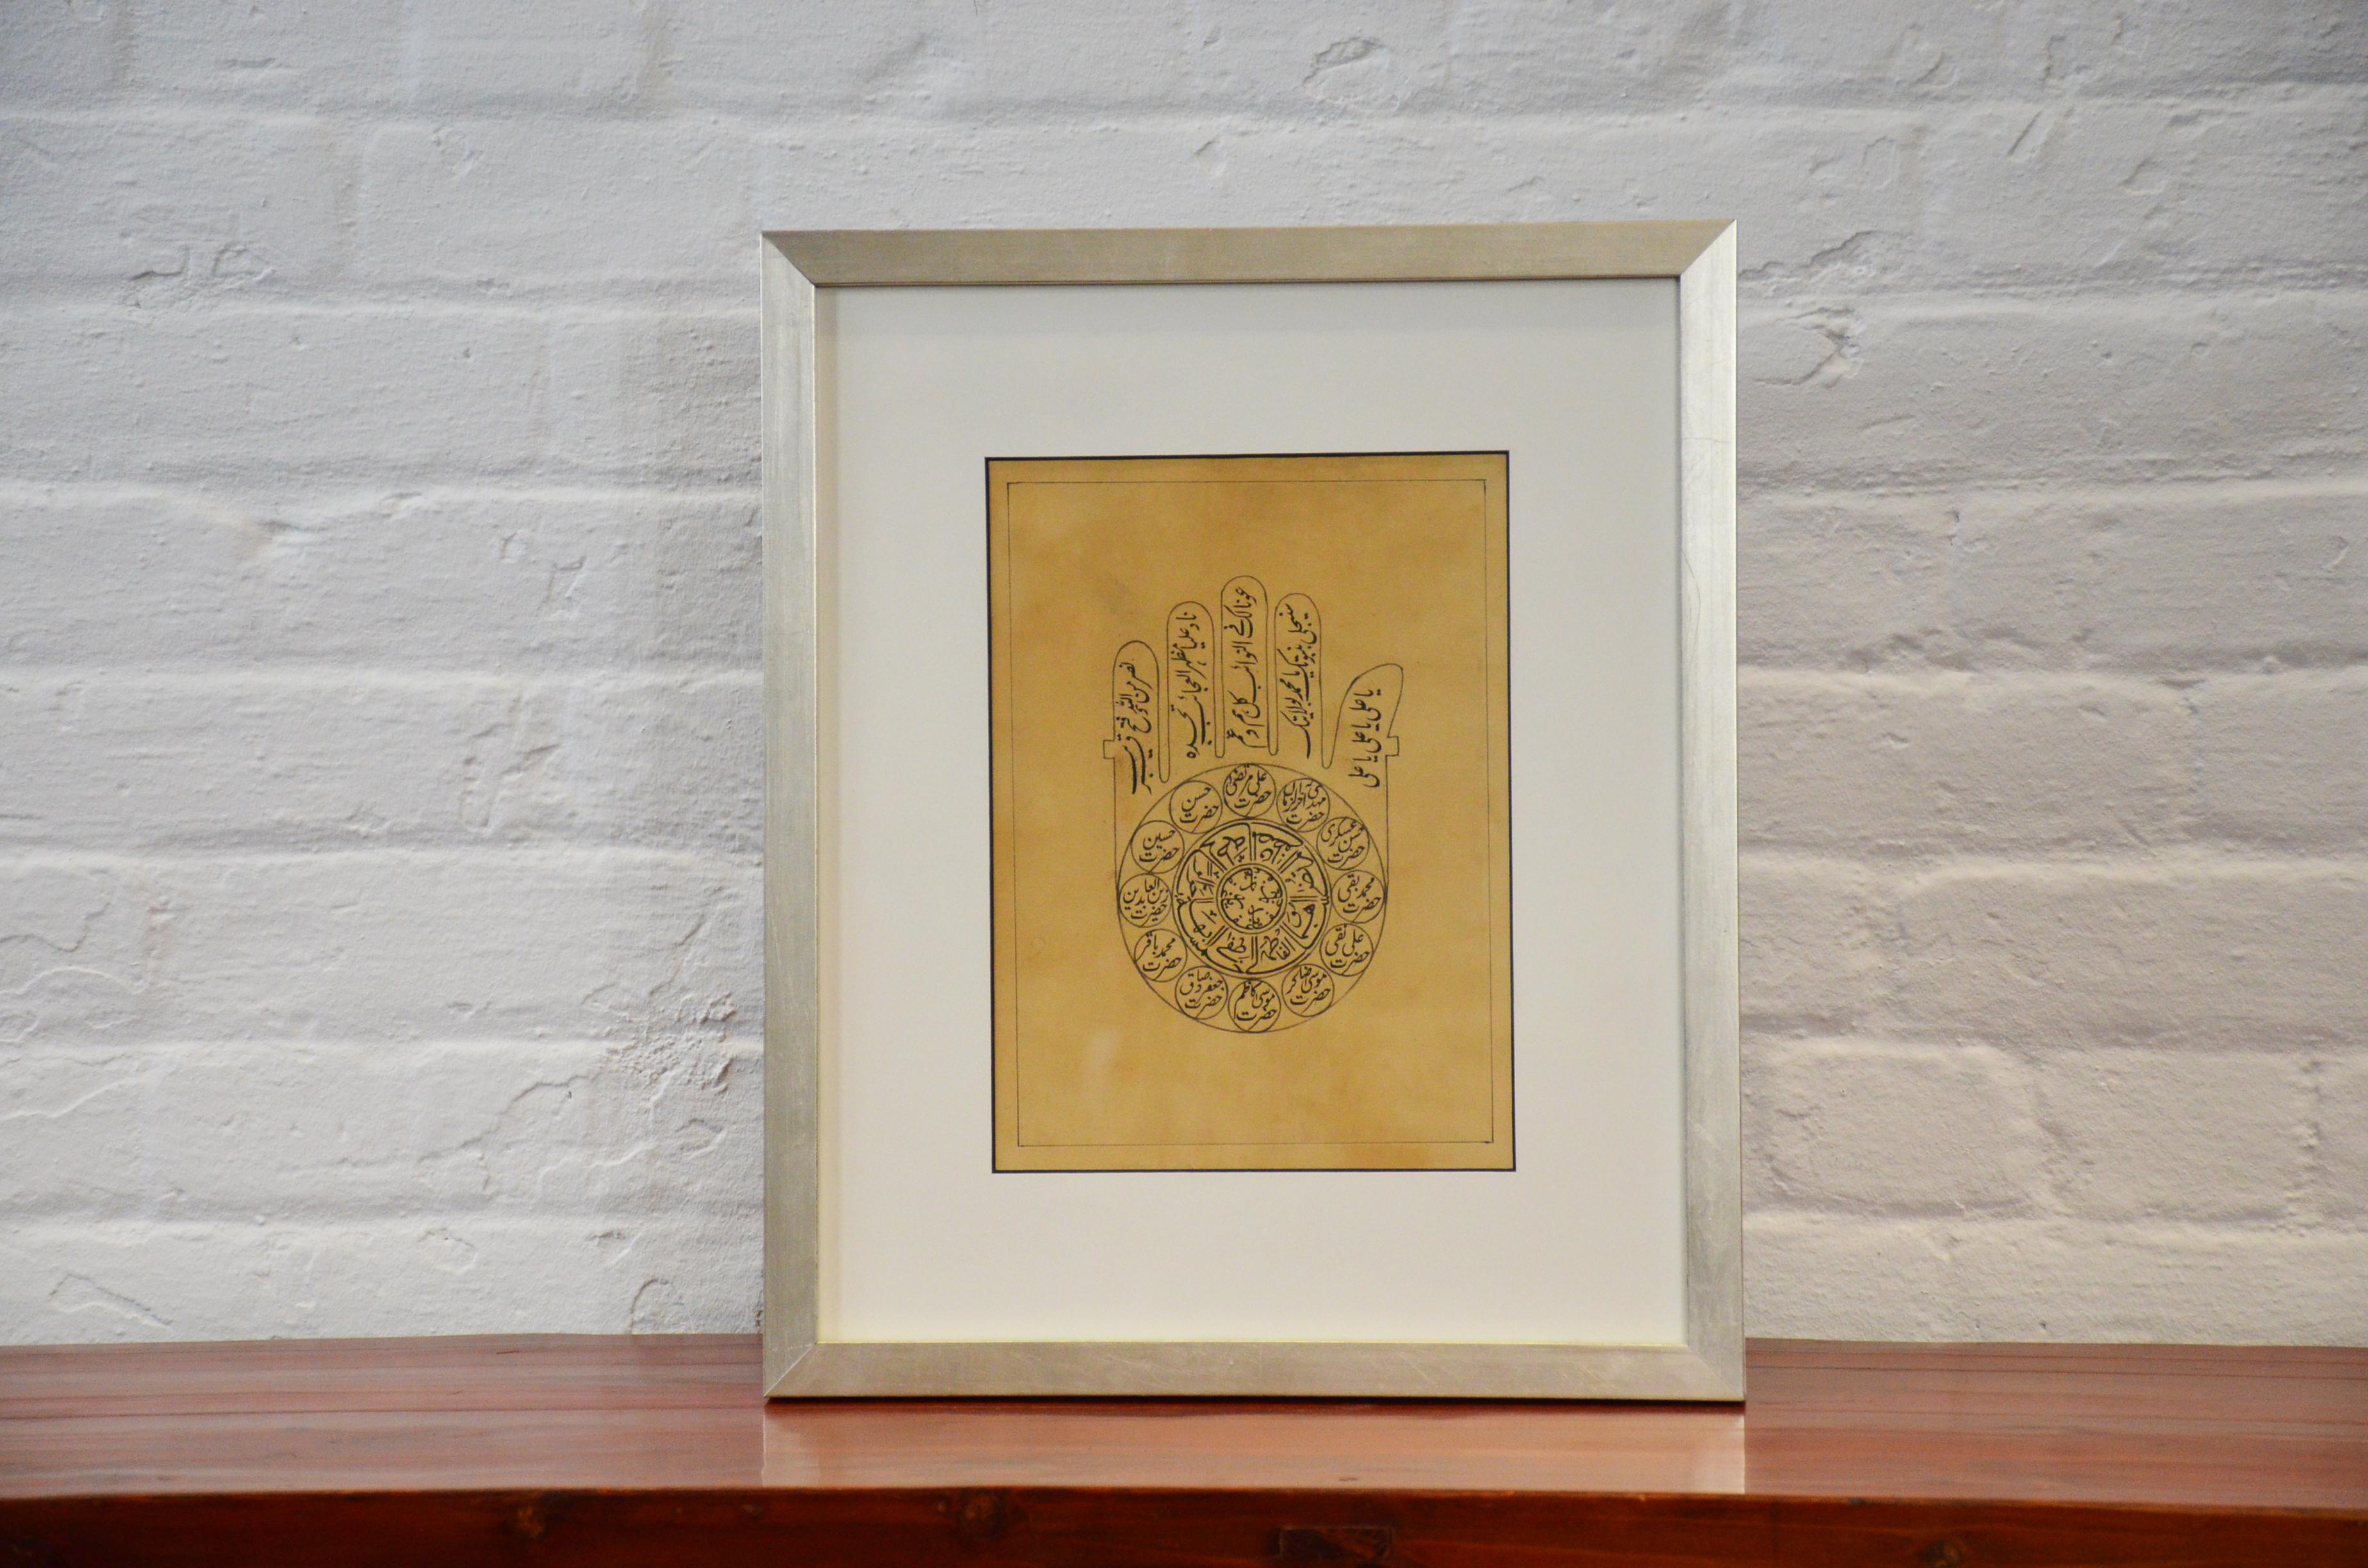 20th Century Astrological Hand-Painted on Parchment Print Depicting a Hand with Calligraphy For Sale